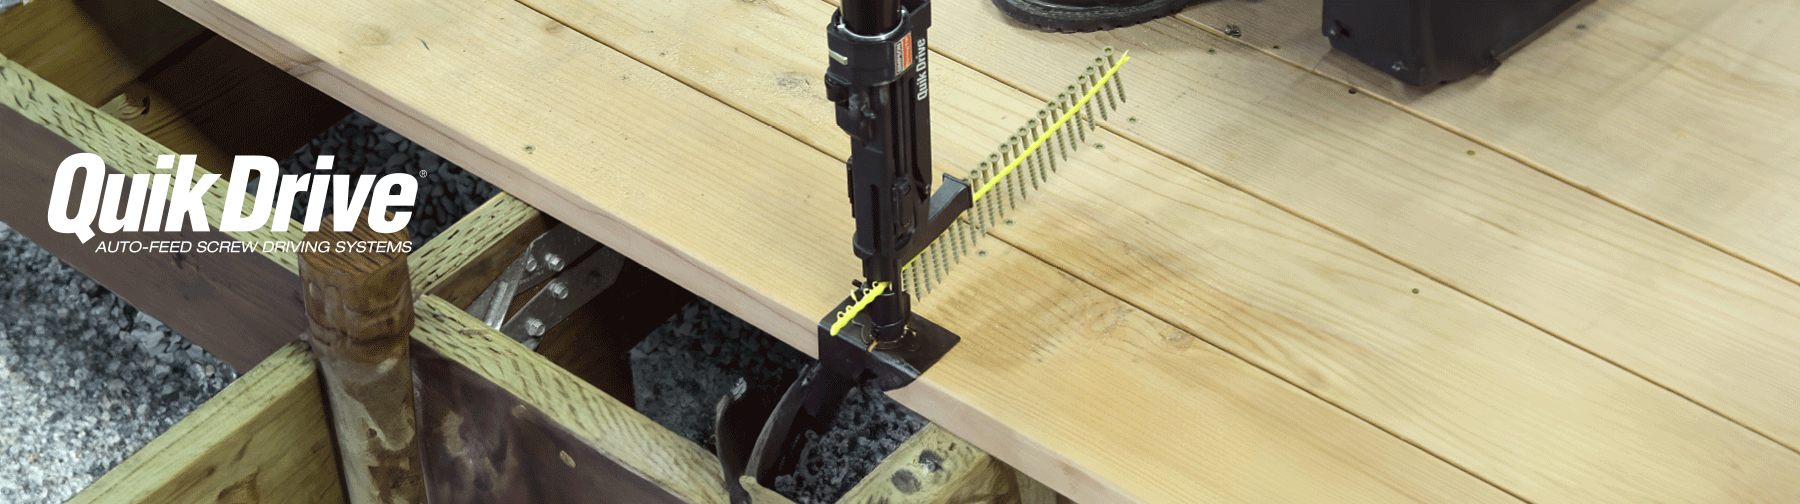 Use of Quik Drive auto-feed screw driving system on a decking project.